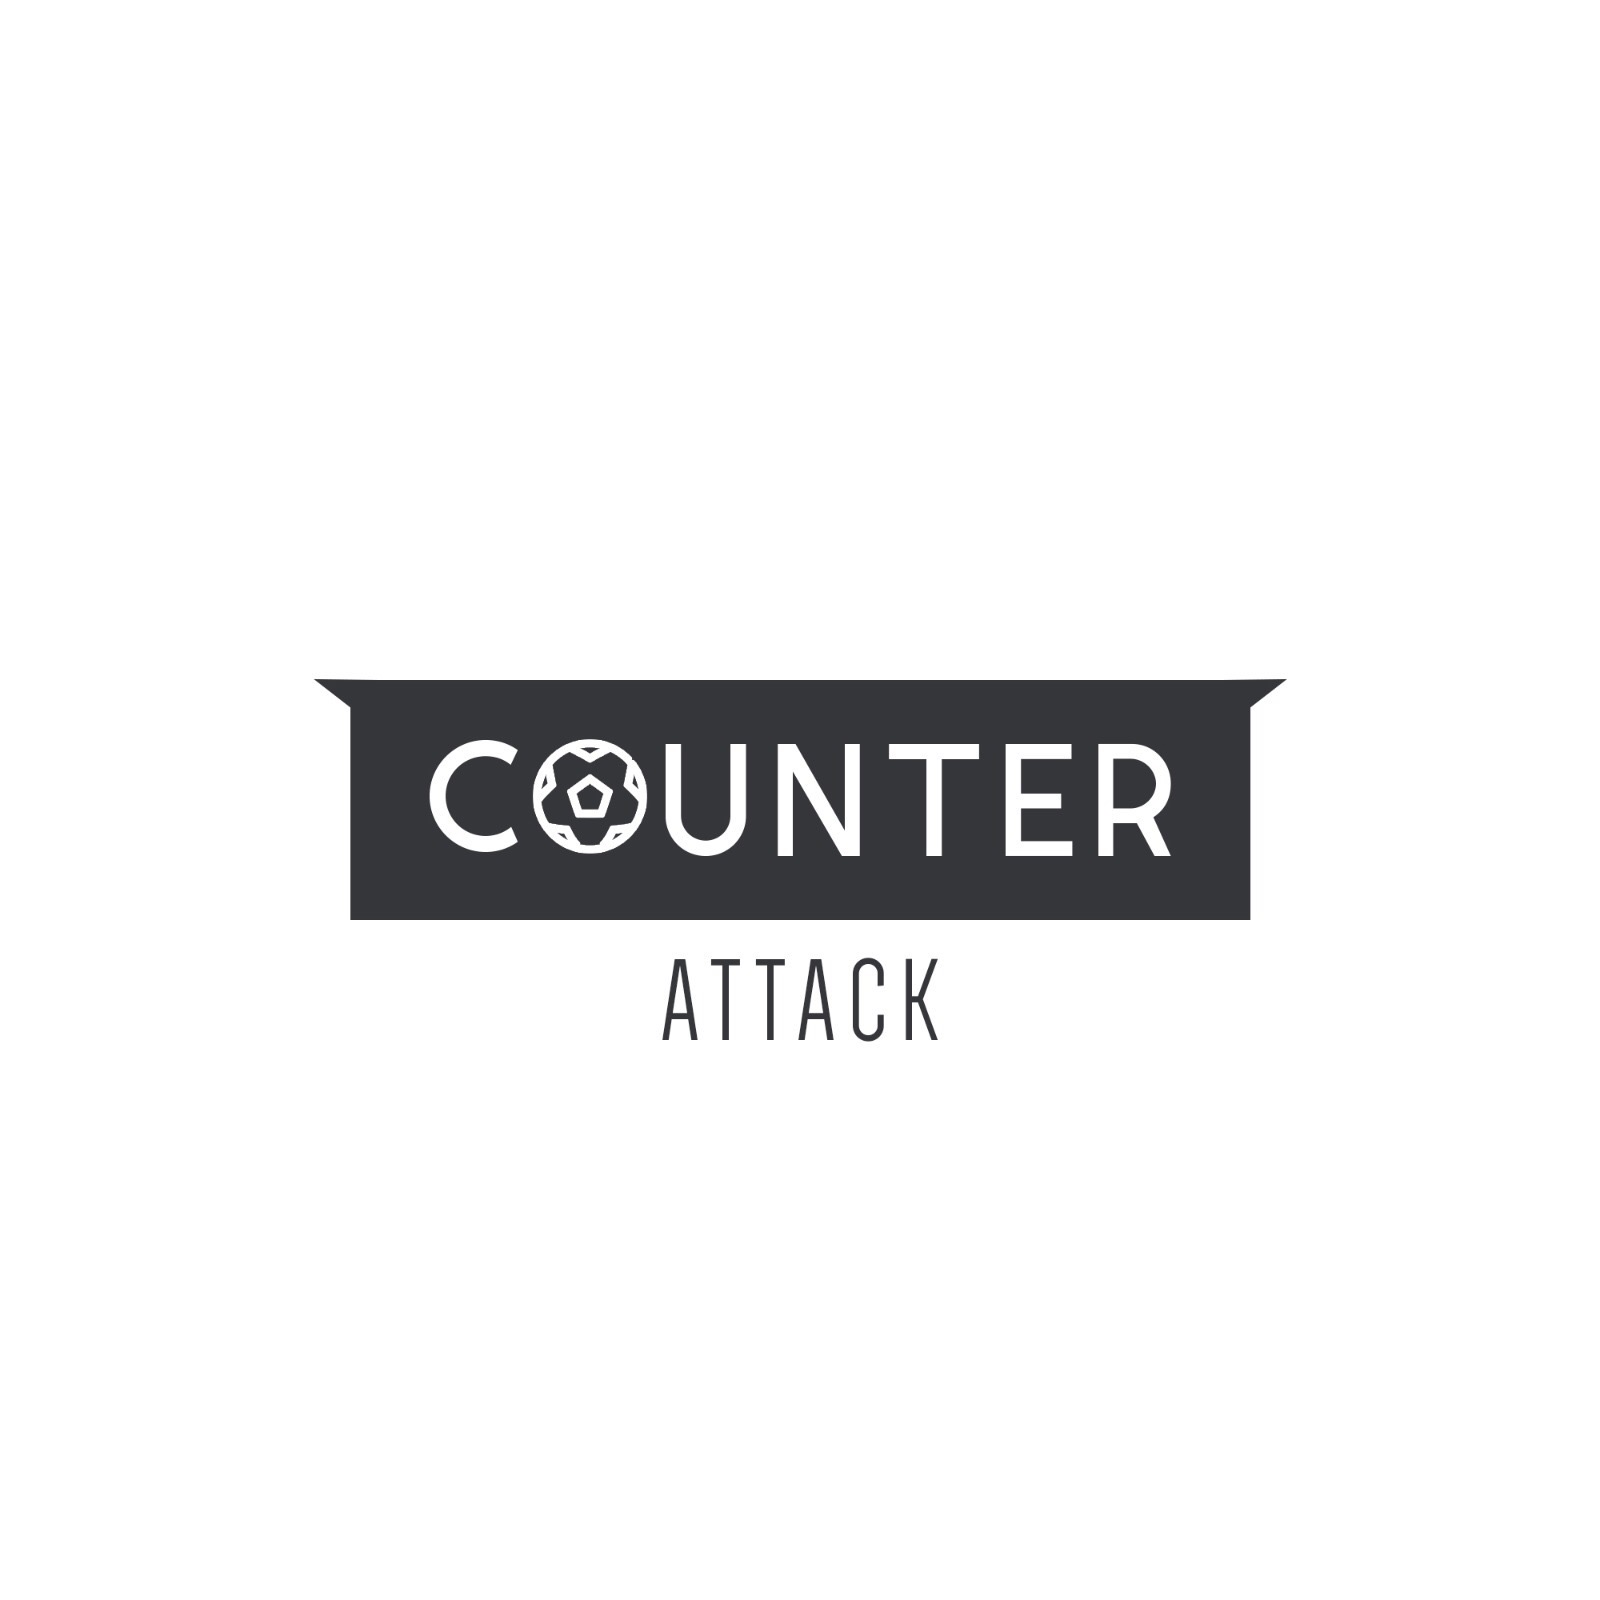 Counter Attack -  Episode 104 - Quarantined with The Full House